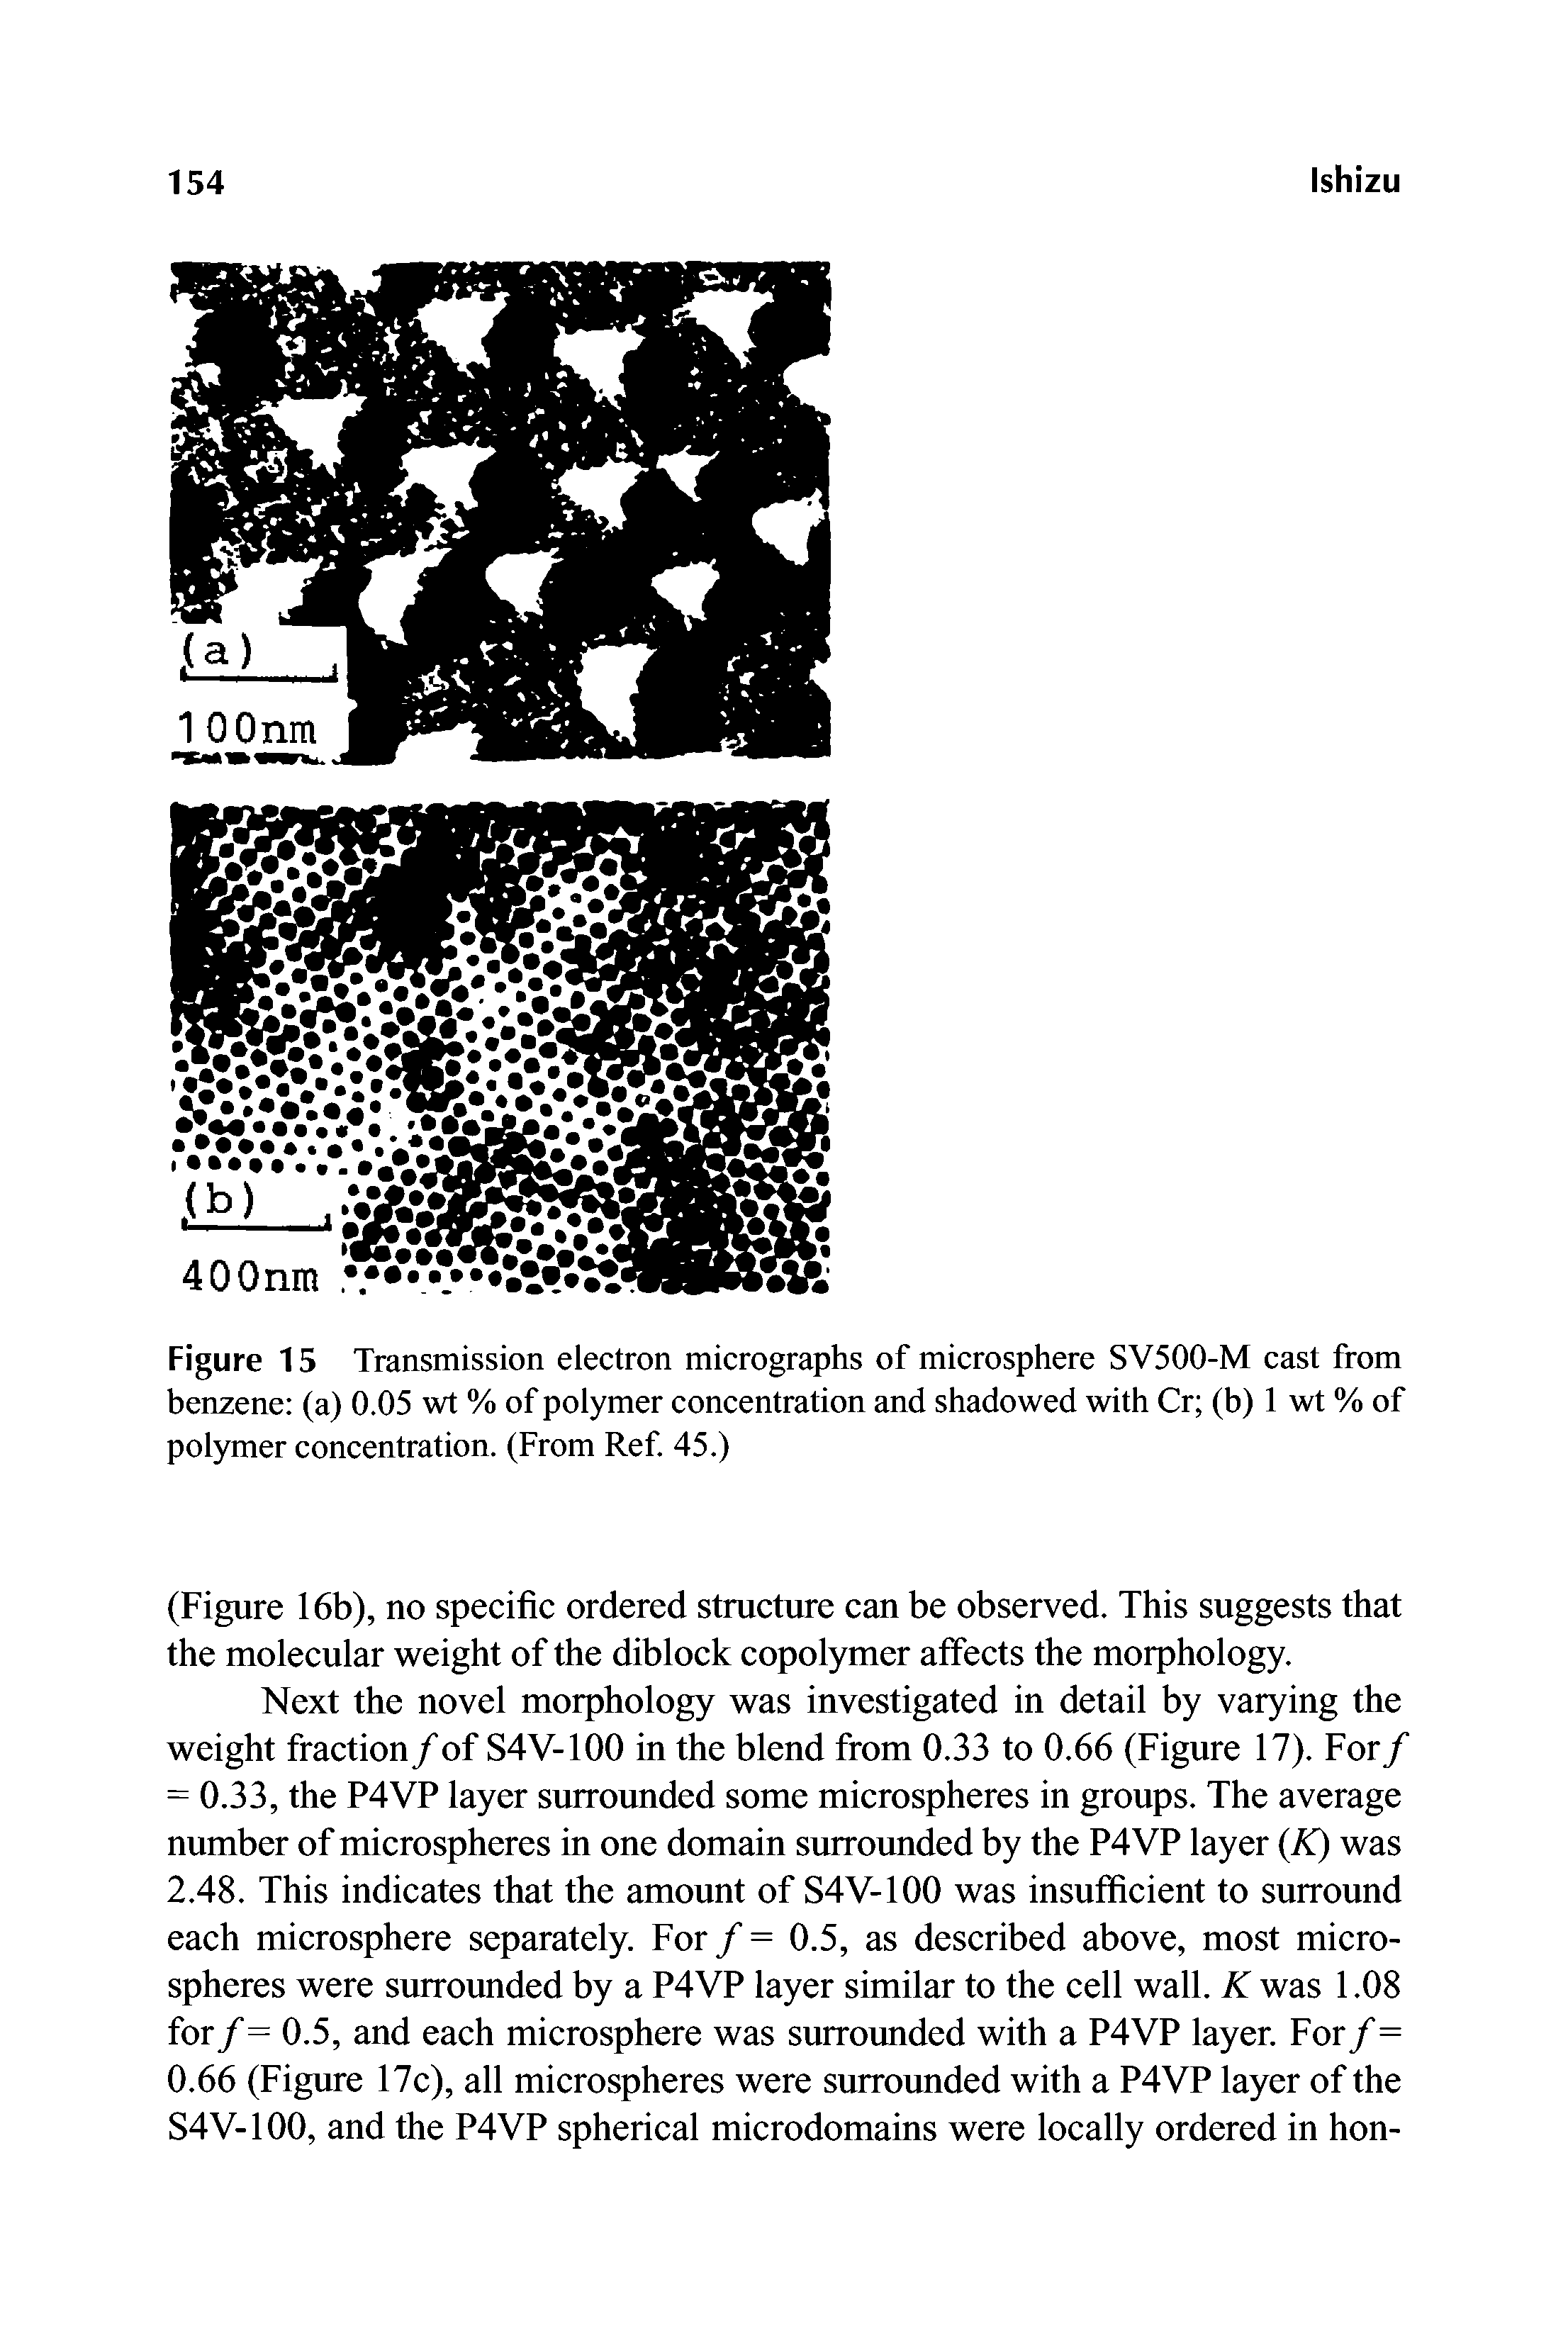 Figure 15 Transmission electron micrographs of microsphere SV500-M cast from benzene (a) 0.05 wt % of polymer concentration and shadowed with Cr (b) 1 wt % of polymer concentration. (From Ref 45.)...